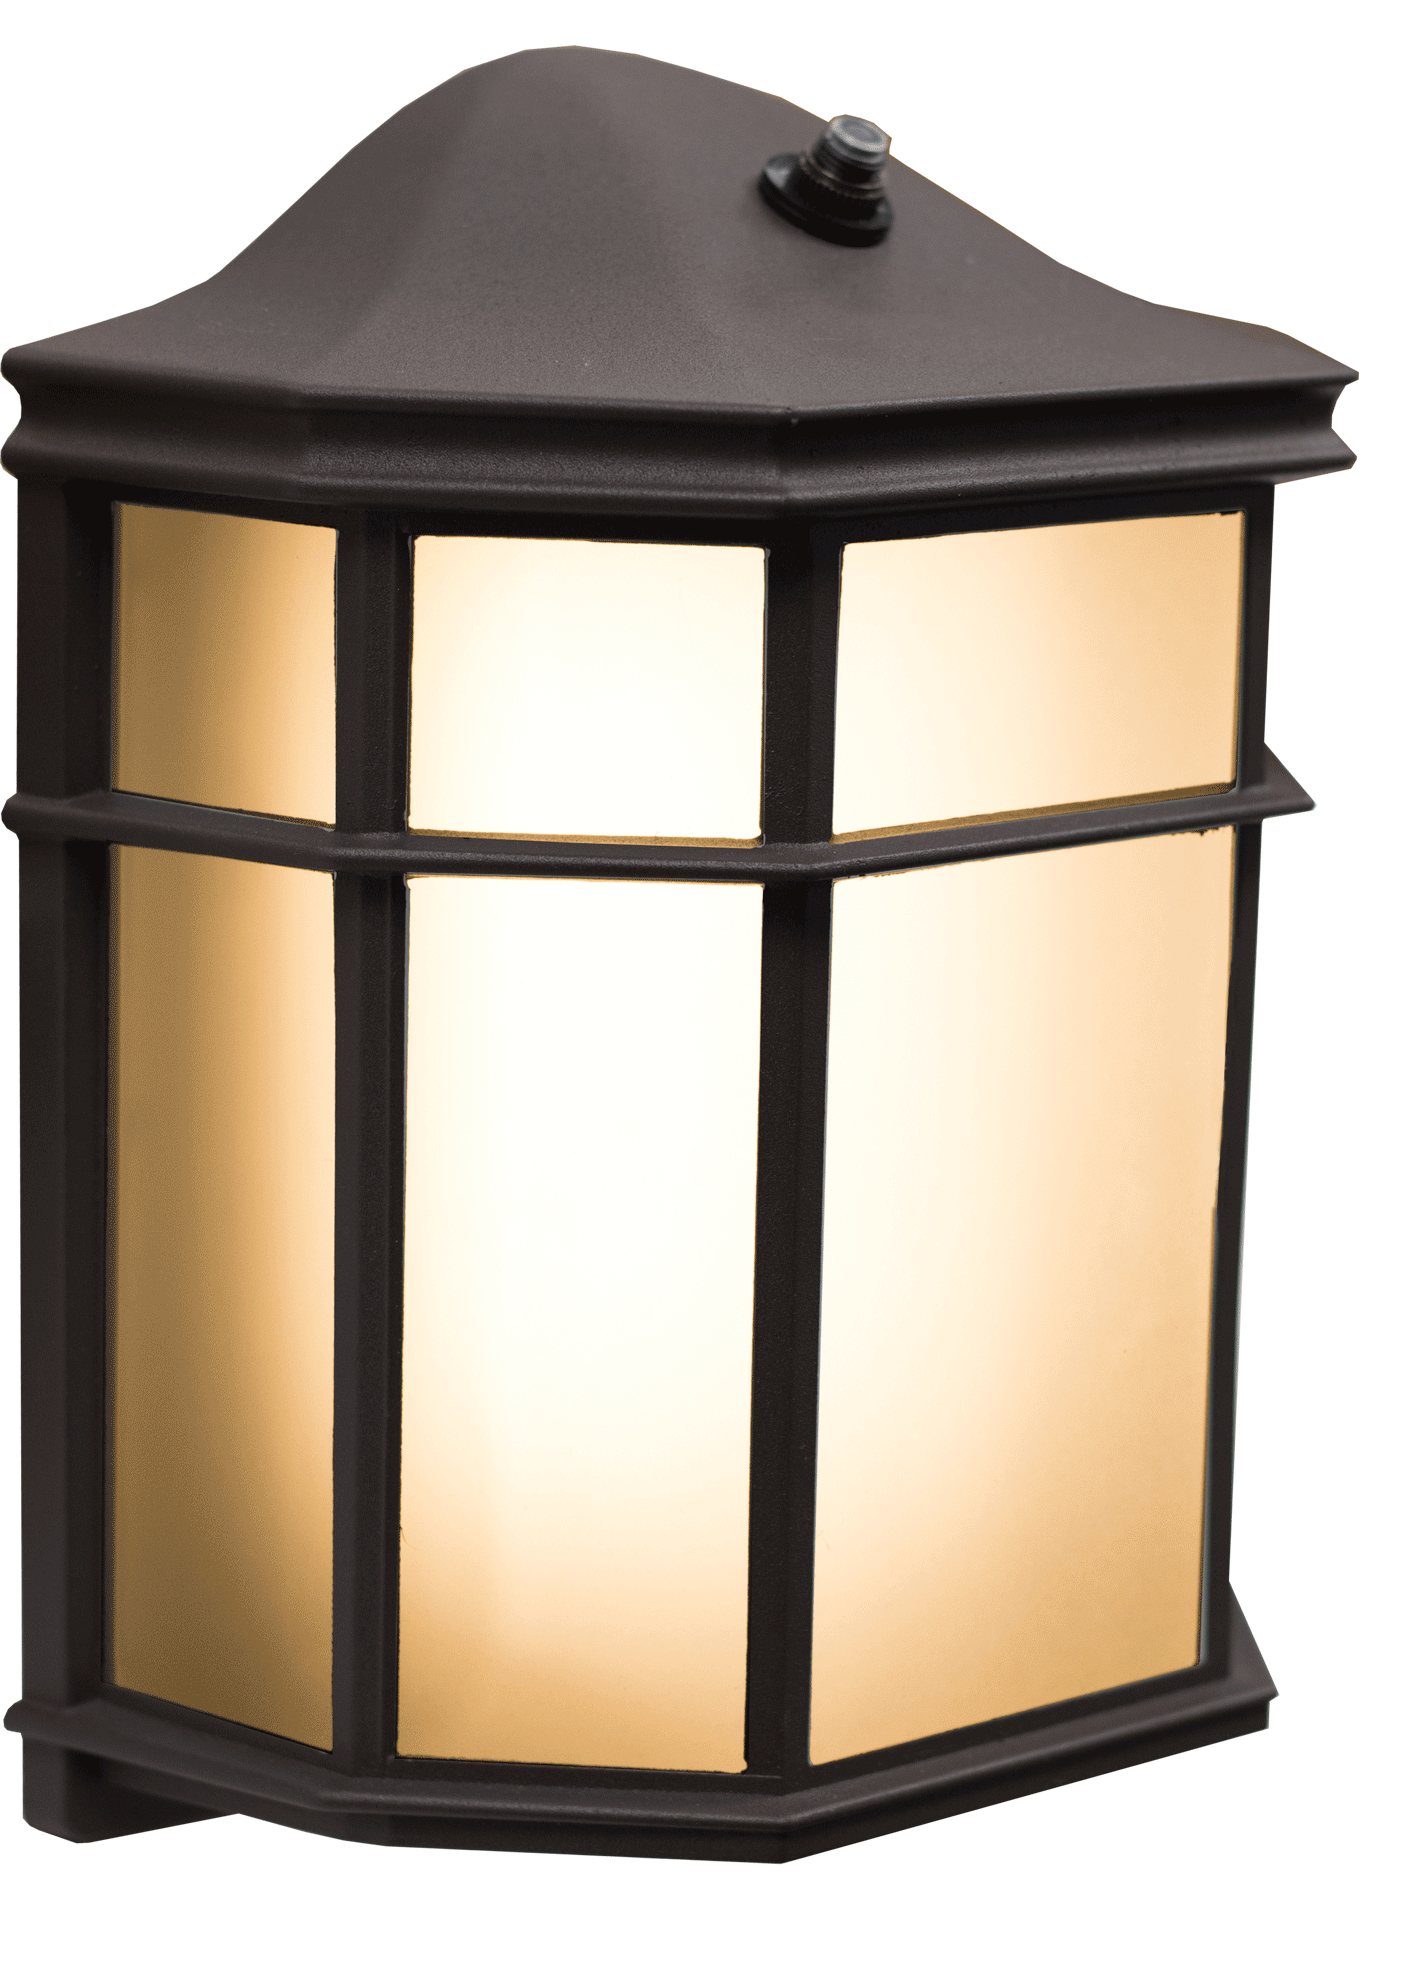 Westgate LRS-A-MCT-PC LED Residential Lanterns with Photocell